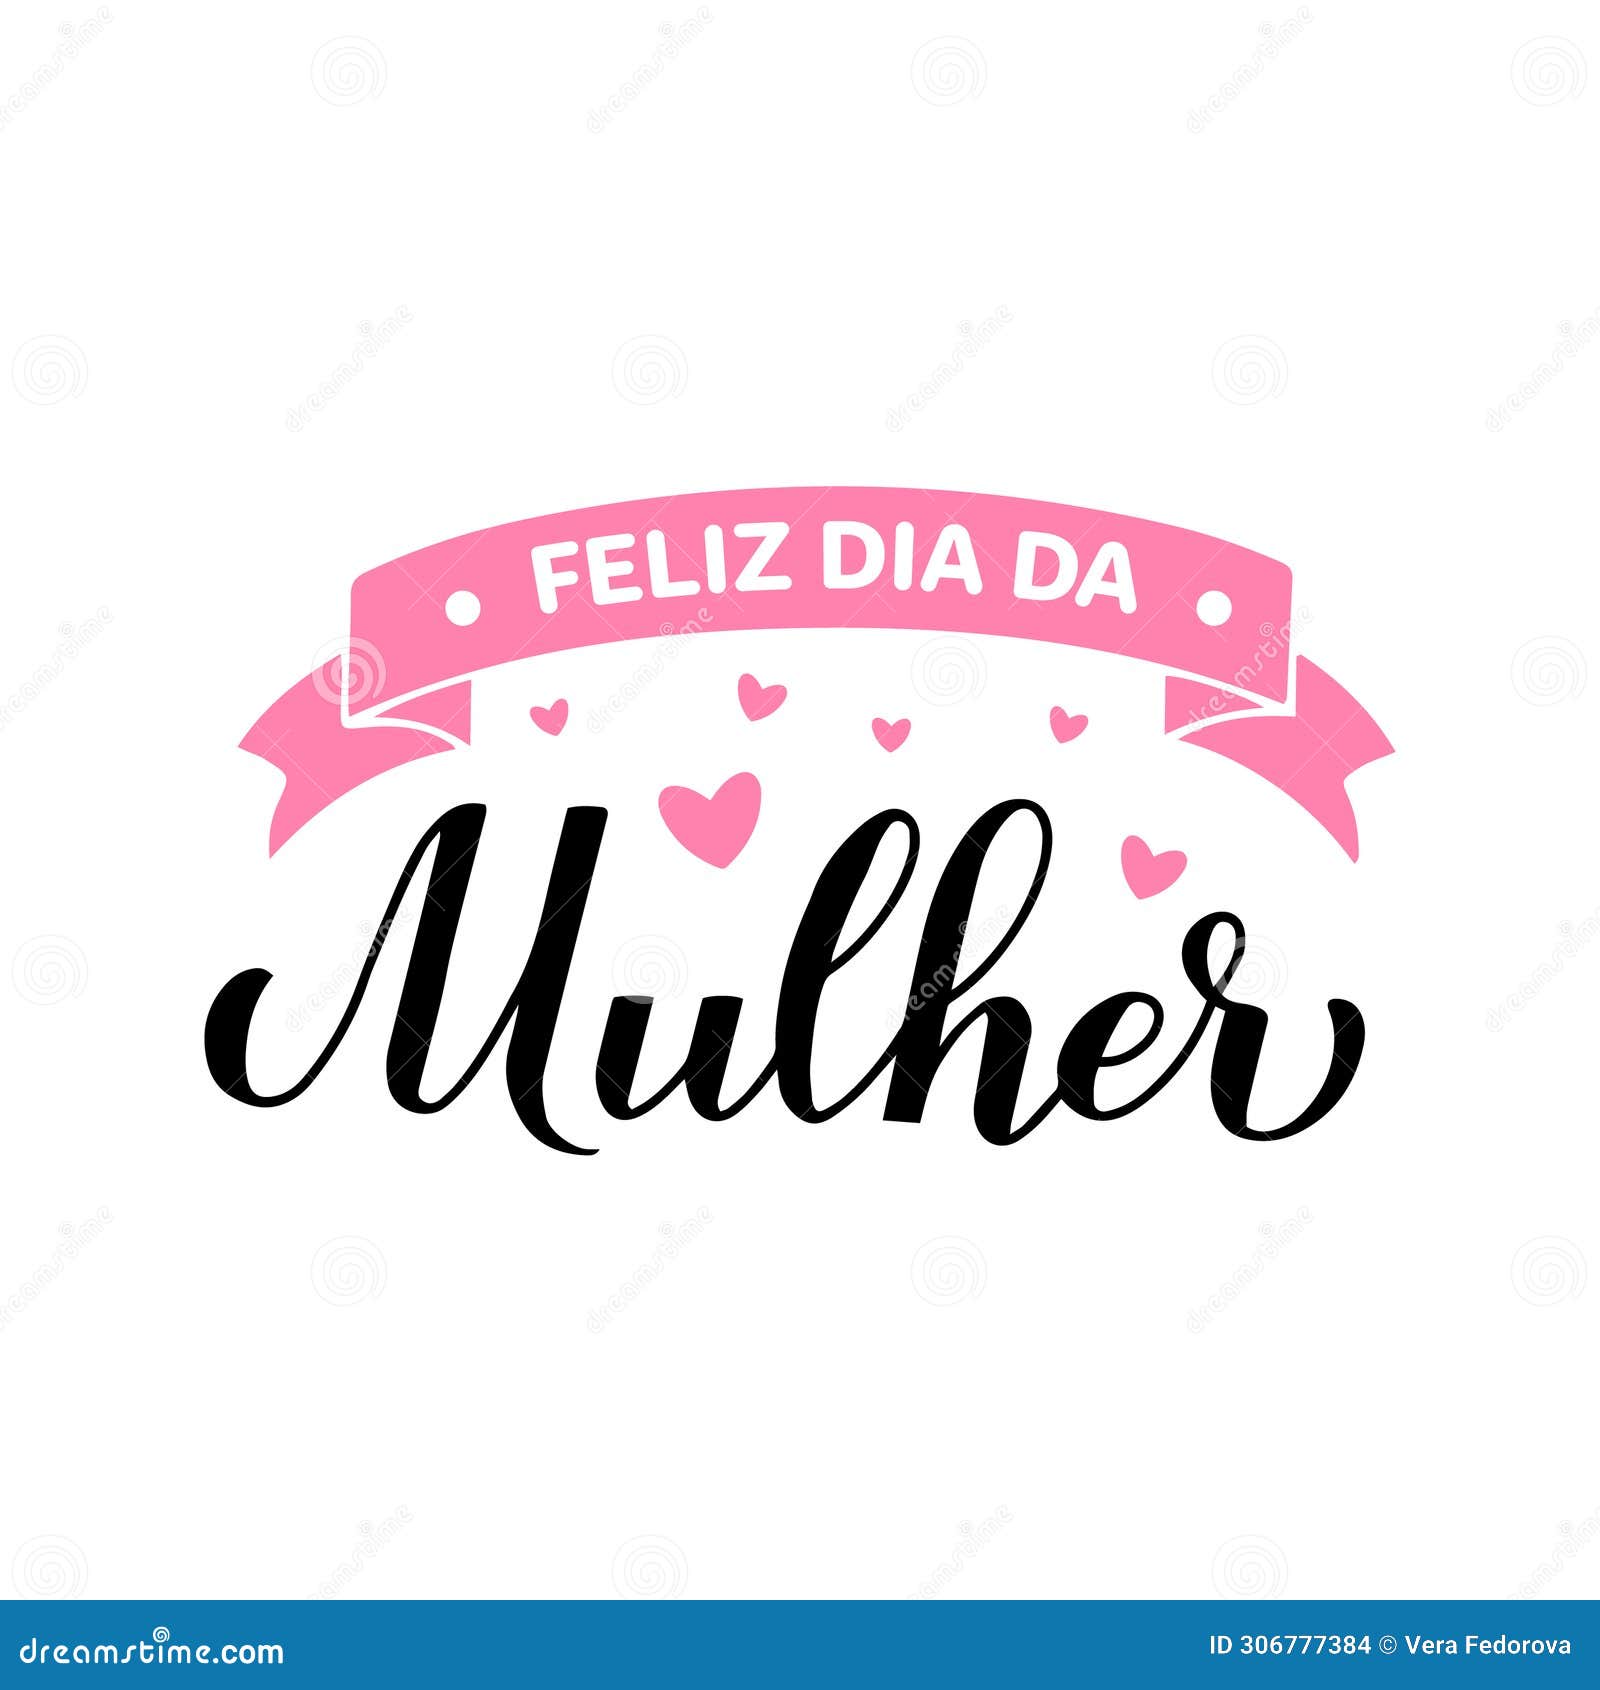 feliz dia da mulher - happy womens day in portuguese. calligraphy hand lettering  on white. international womans